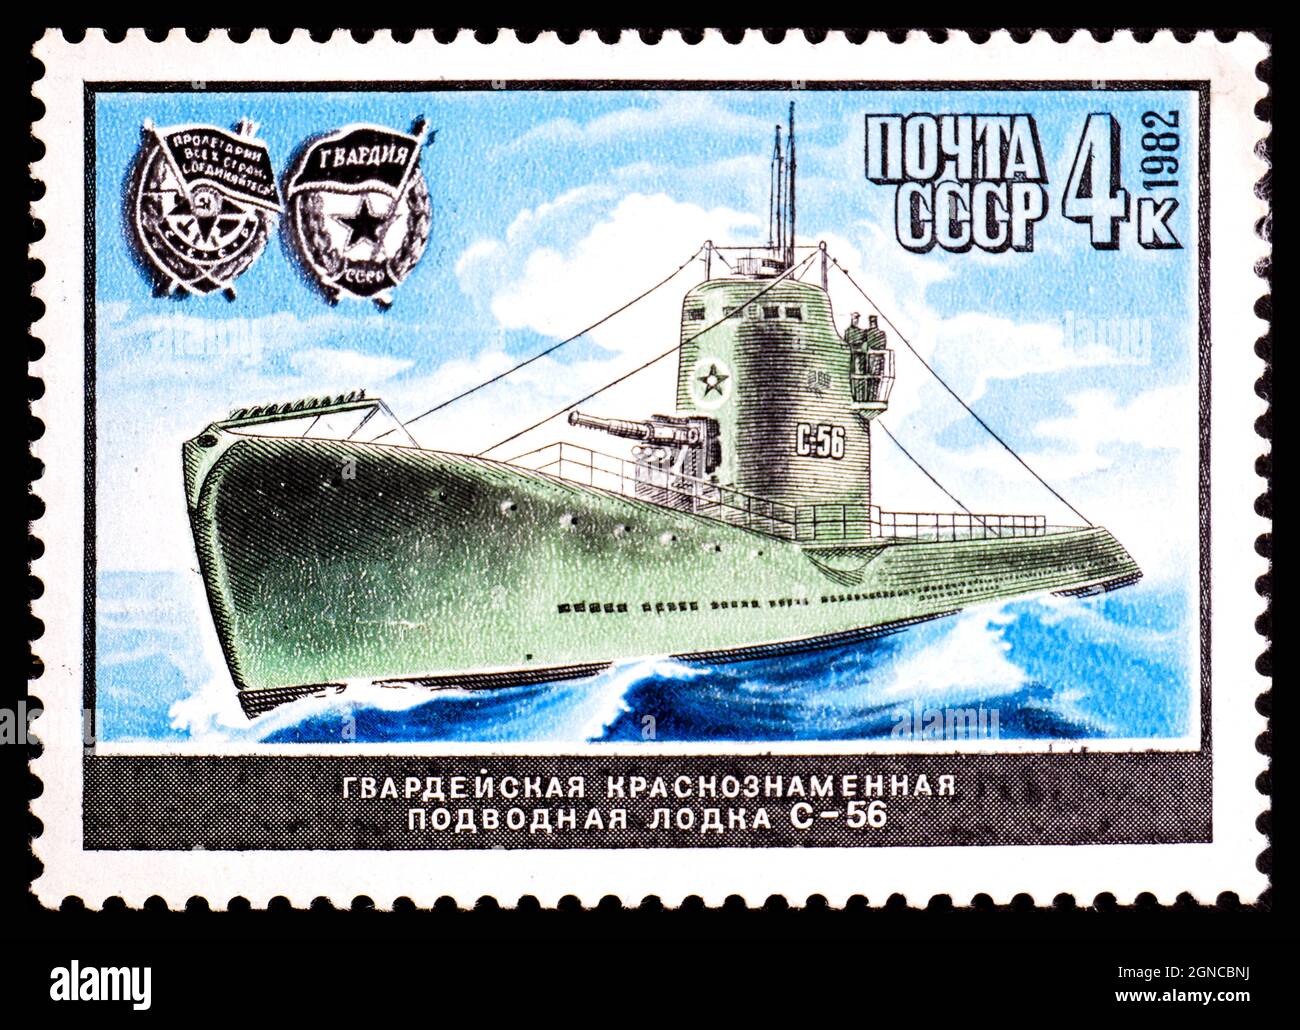 USSR - CIRCA 1982: A stamp printed in the USSR showing Soviet S class submarine C-56 Stock Photo